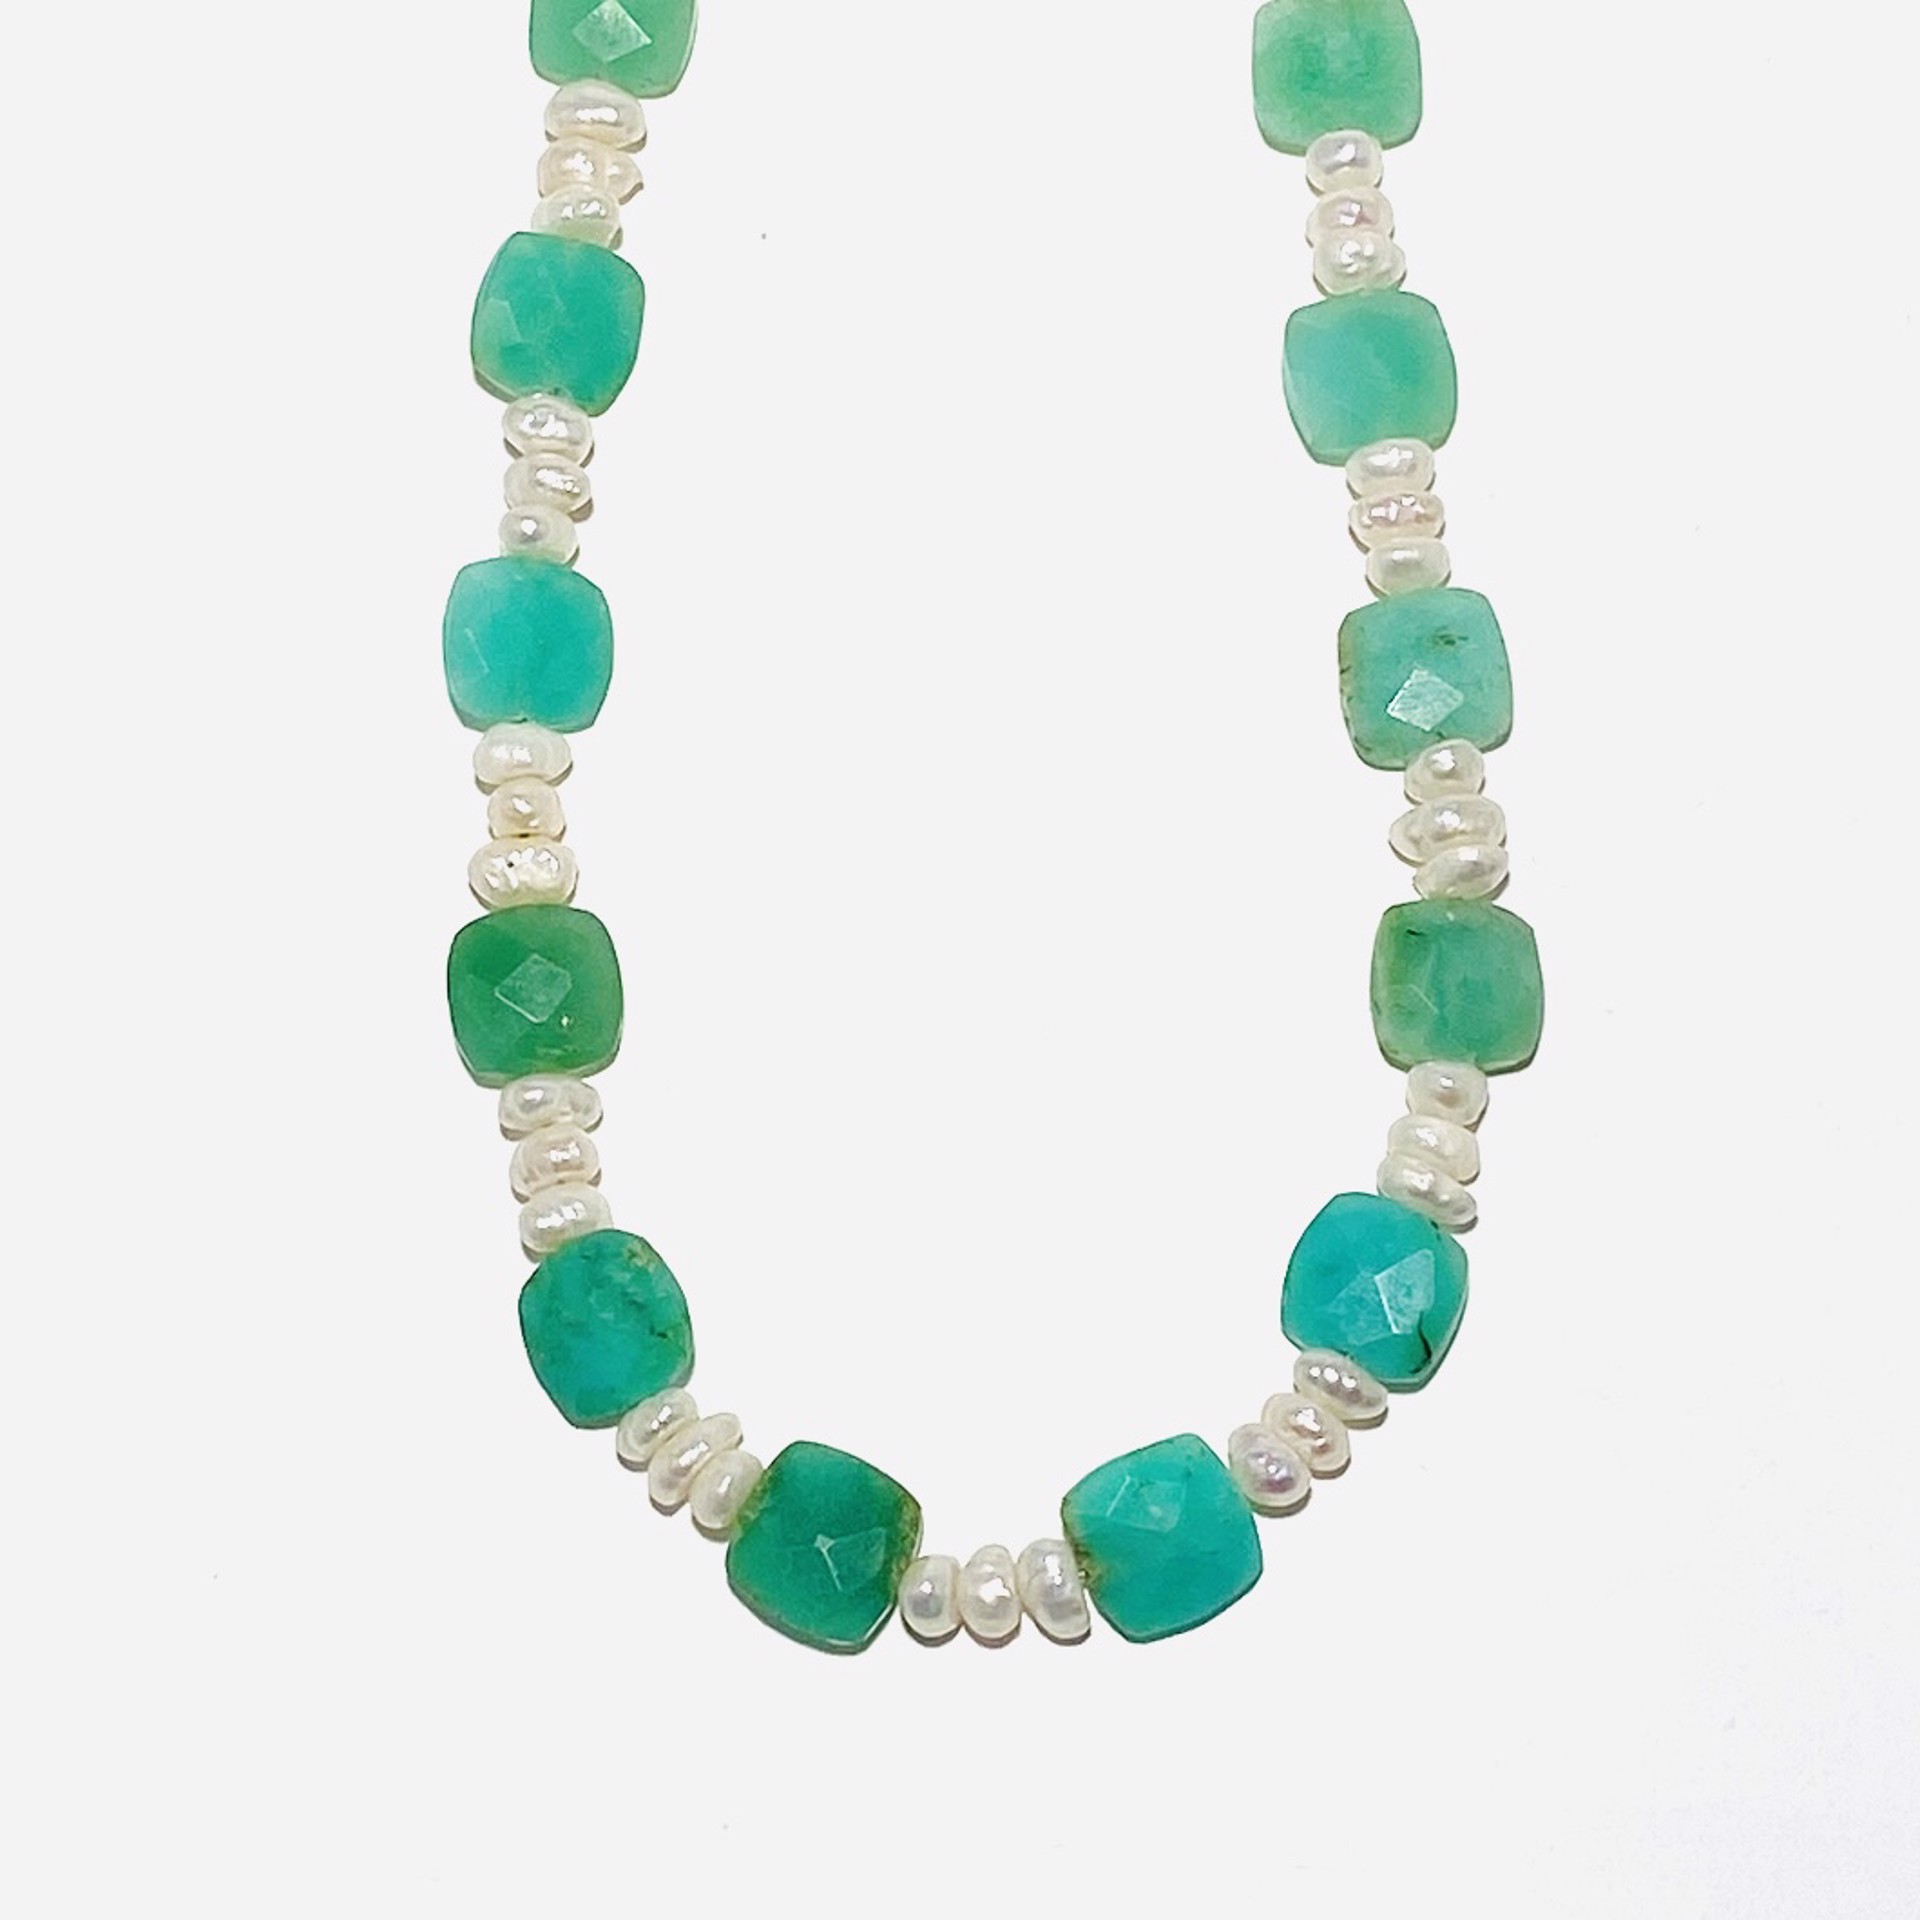 Square Faceted Prehnite Pearl Strand Necklace by Nance Trueworthy